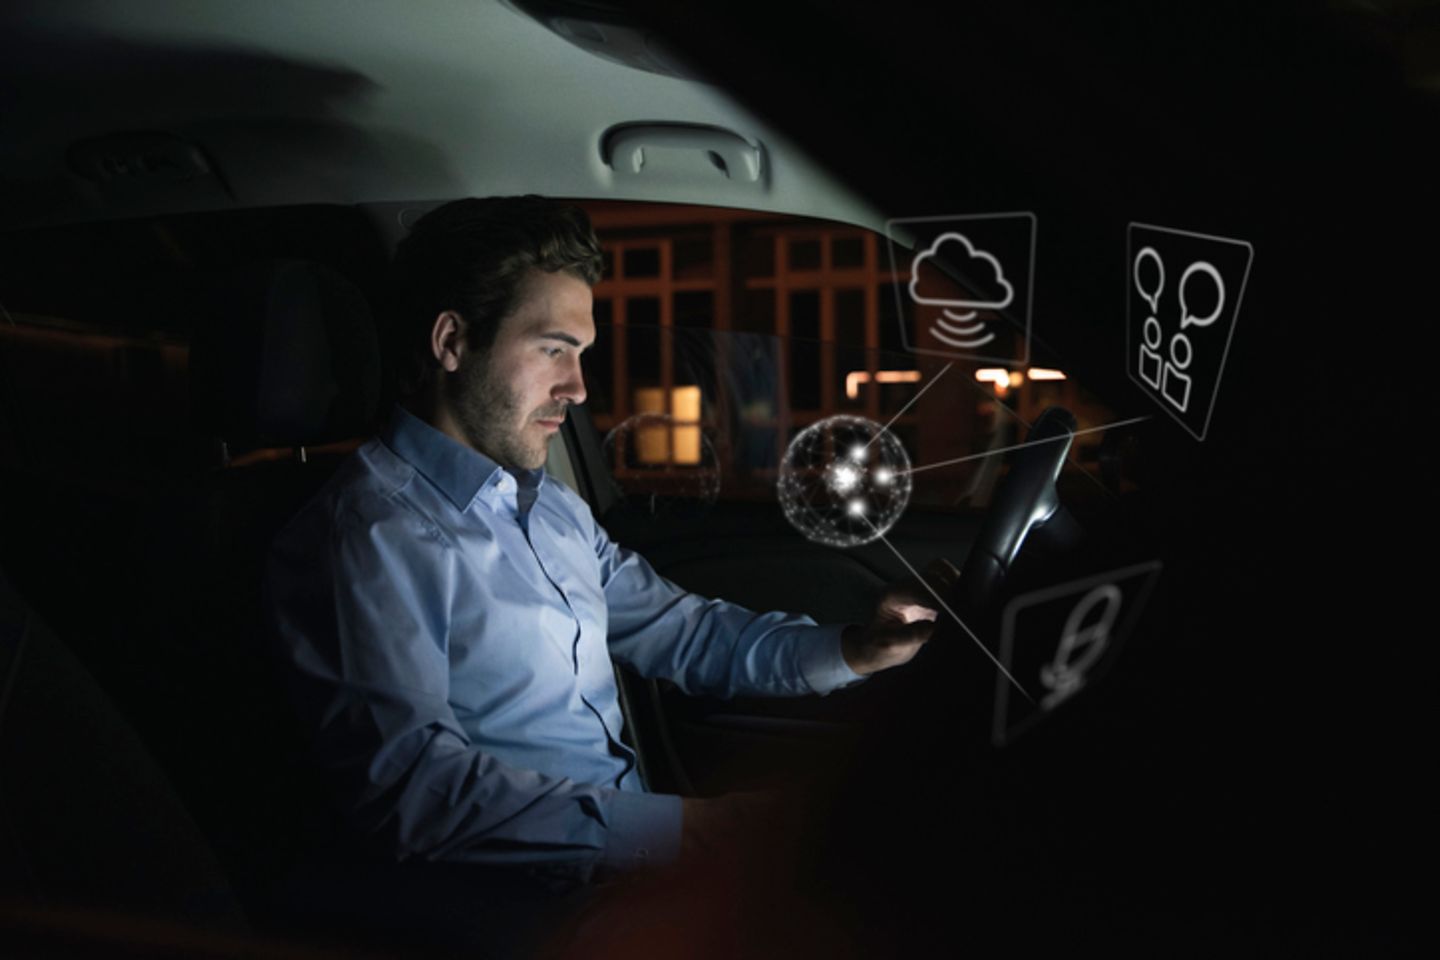 A man uses a device in his car at night, surrounded by Internet symbols